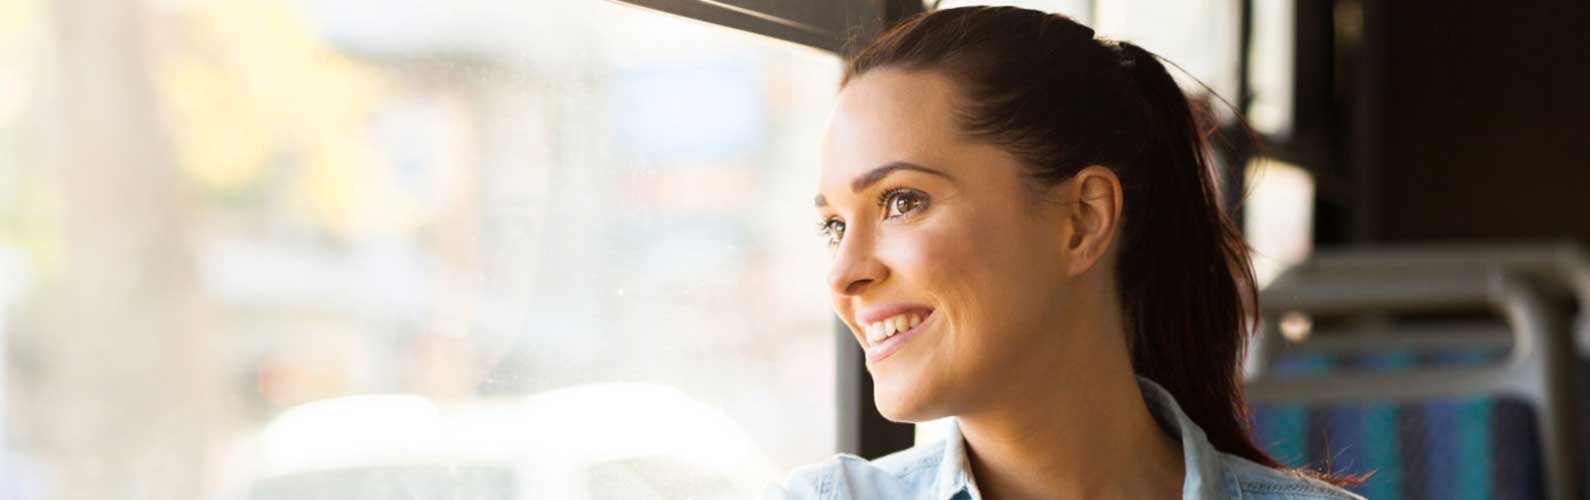 A woman smiles while riding the EC Rider Bus